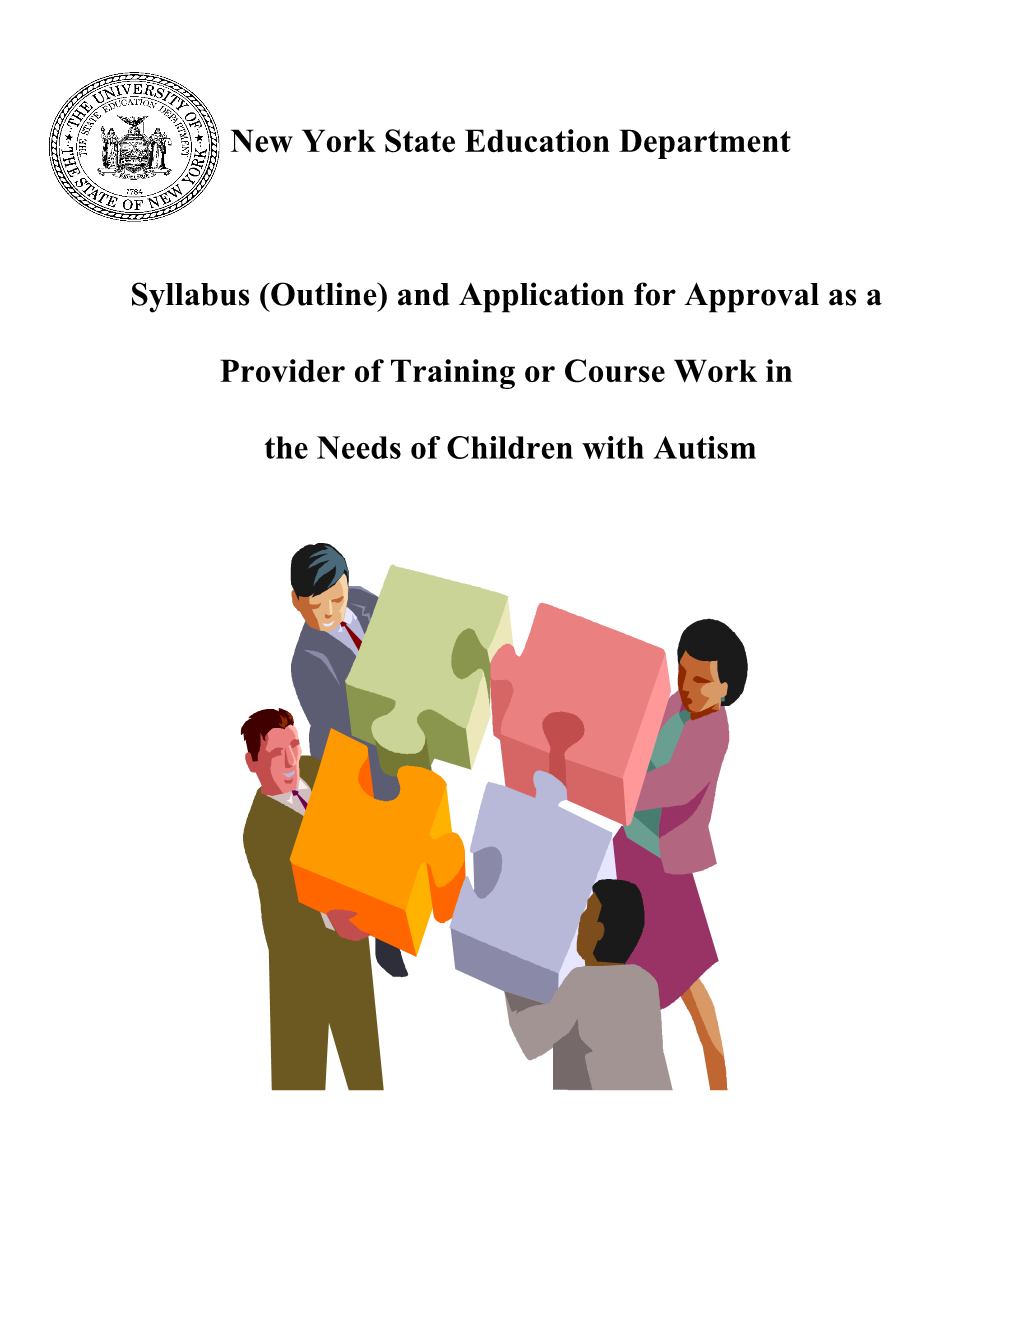 Syllabus (Outline) and Applicationfor Approval As A